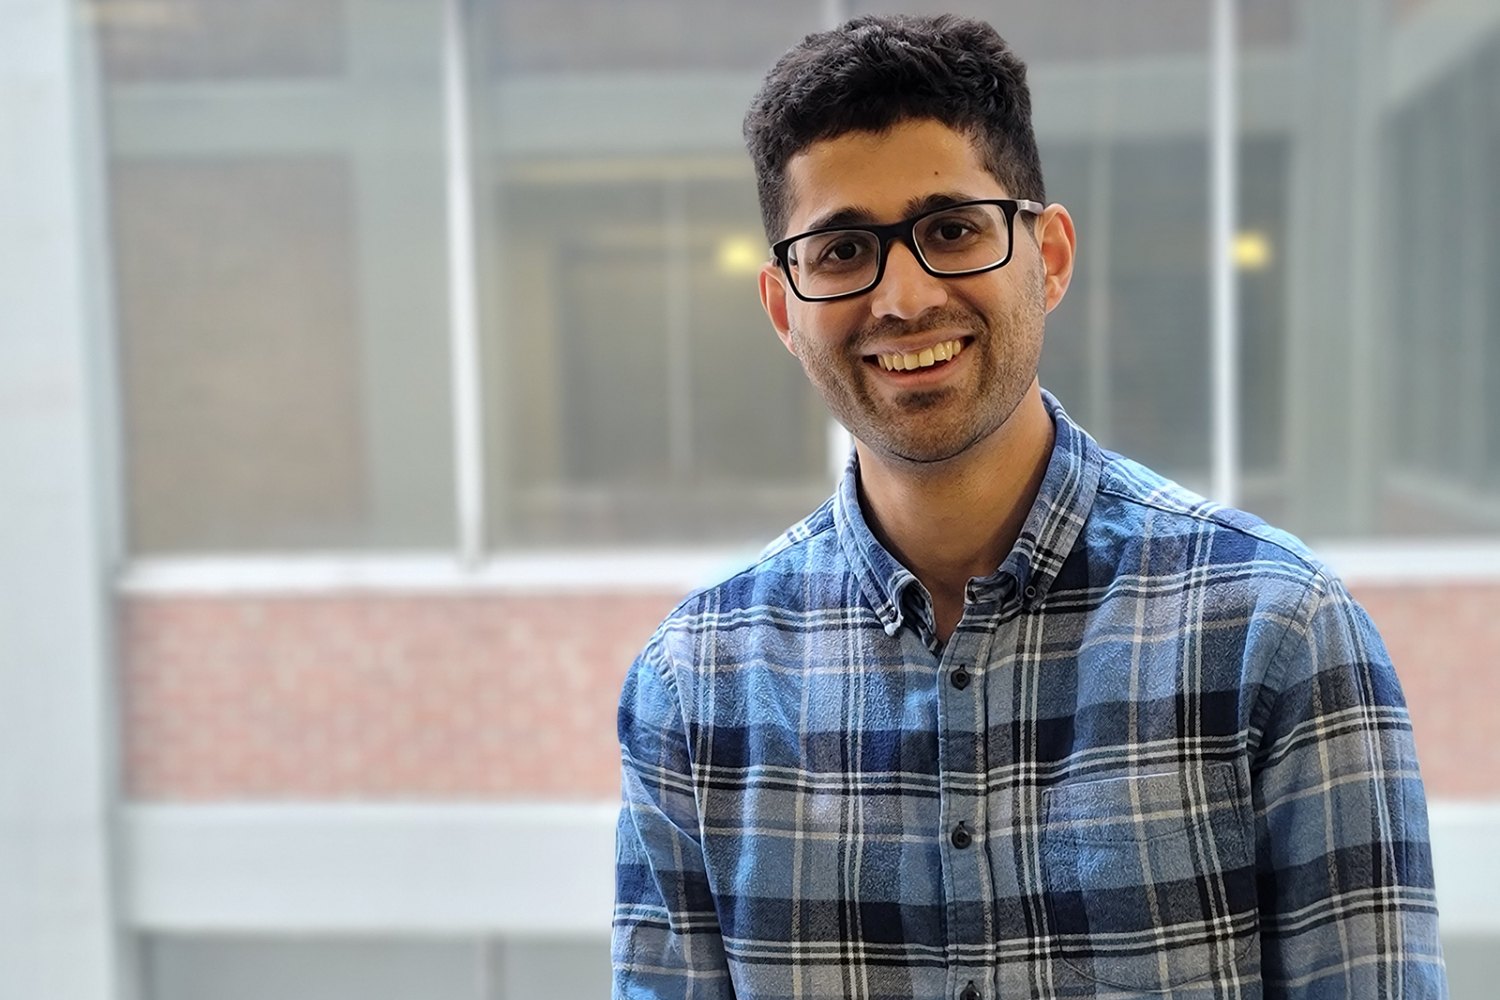 Hammaad Adam, a grad student in the IDSS Social and Engineering Systems PhD program, focuses his research on using statistical tools to uncover health-care inequities and developing machine learning approaches to address them.